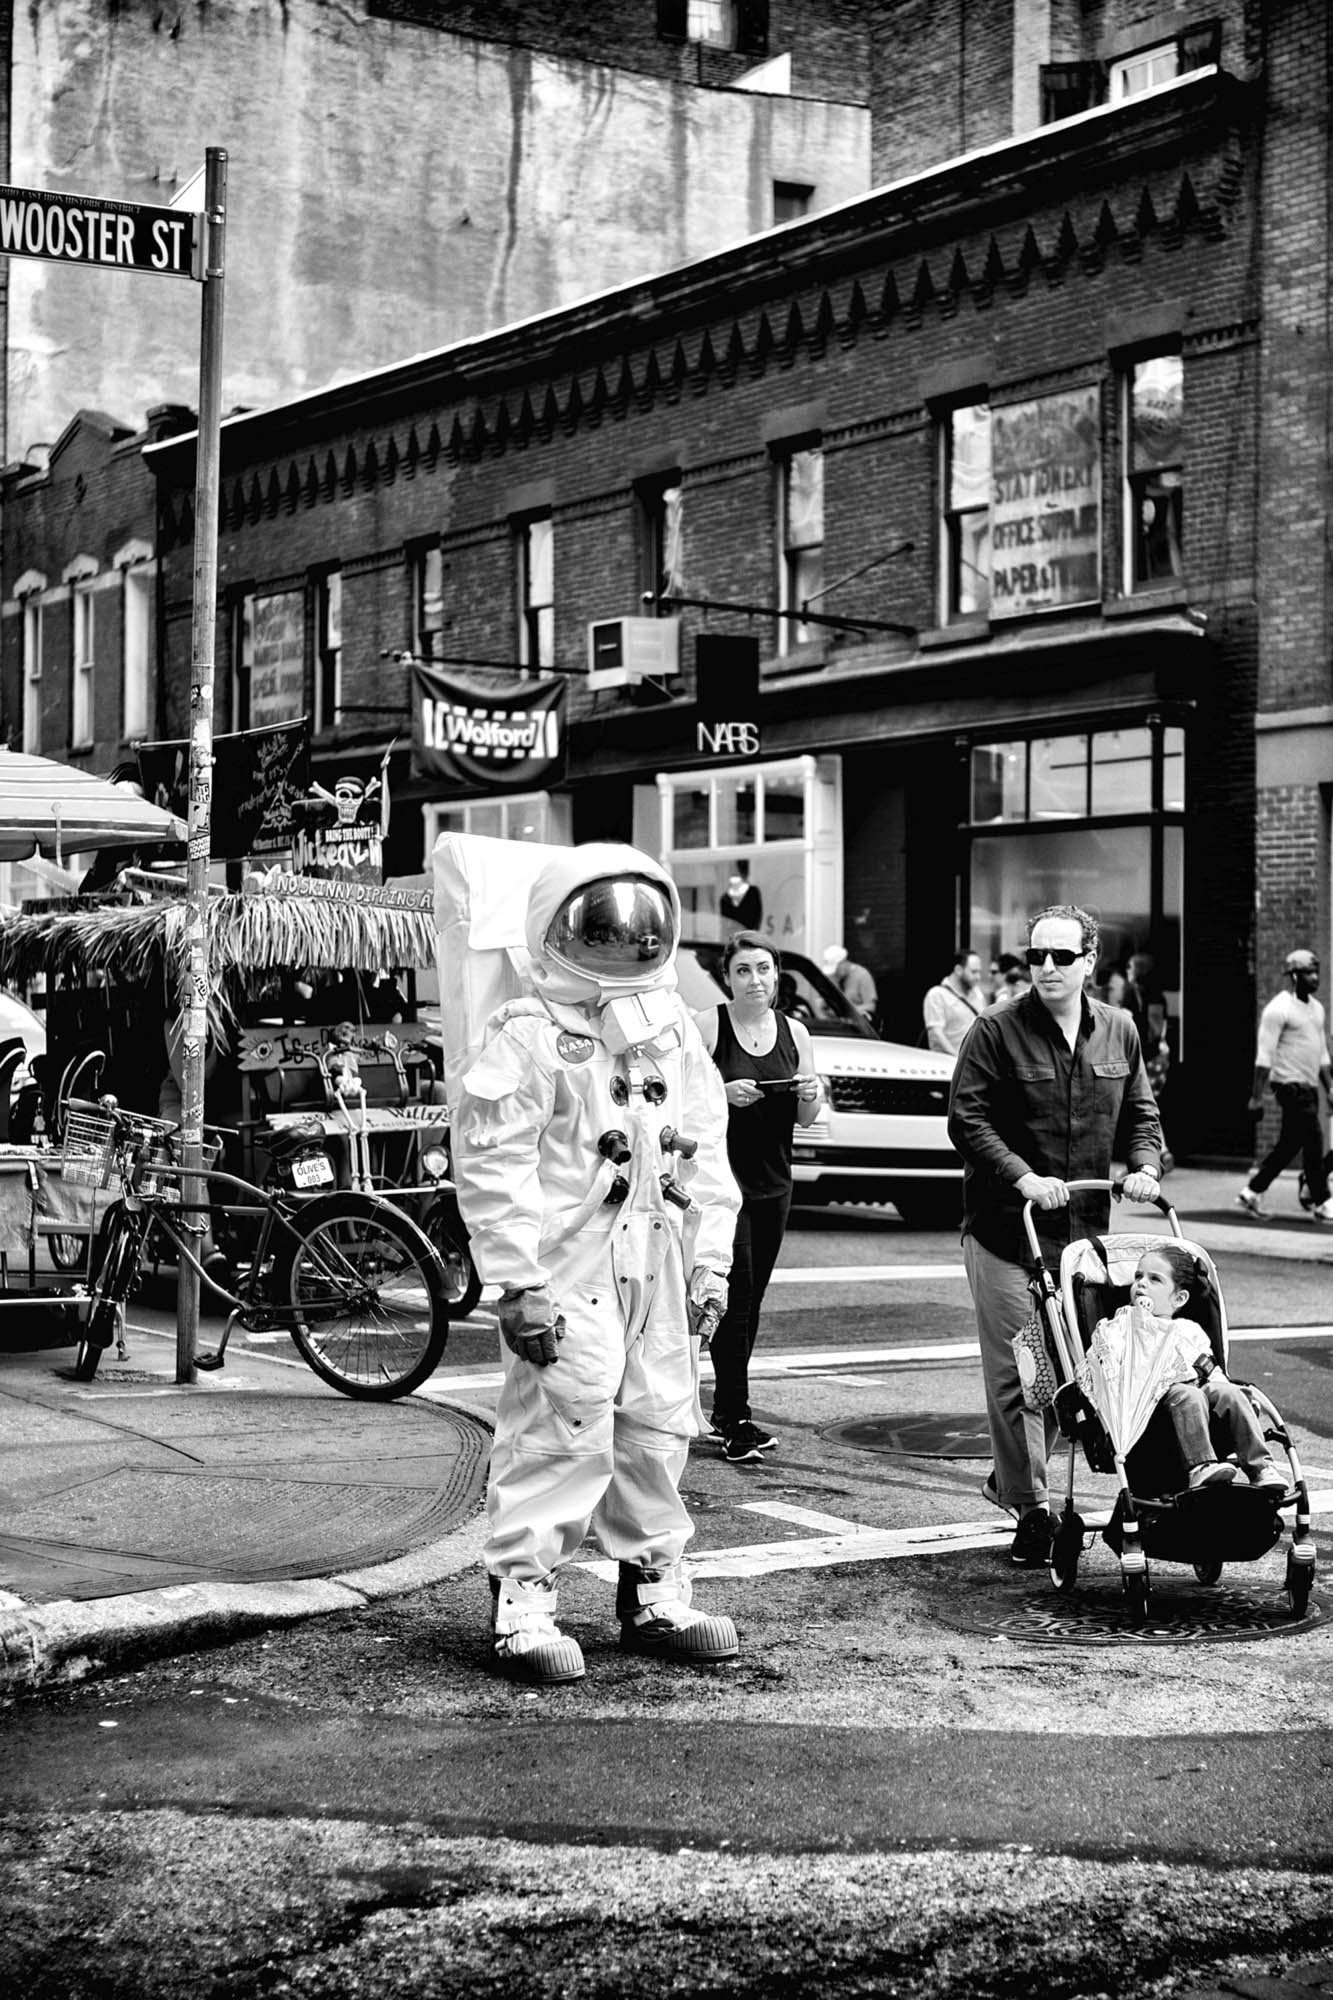  June 18th 2015:  A Spaceman seen walking around in Soho, New York City, USA. Pictures by Phil Penman WWW.PHILPENMAN.COM Cellphone: 917 496 1644 penmanphoto@gmail.com 